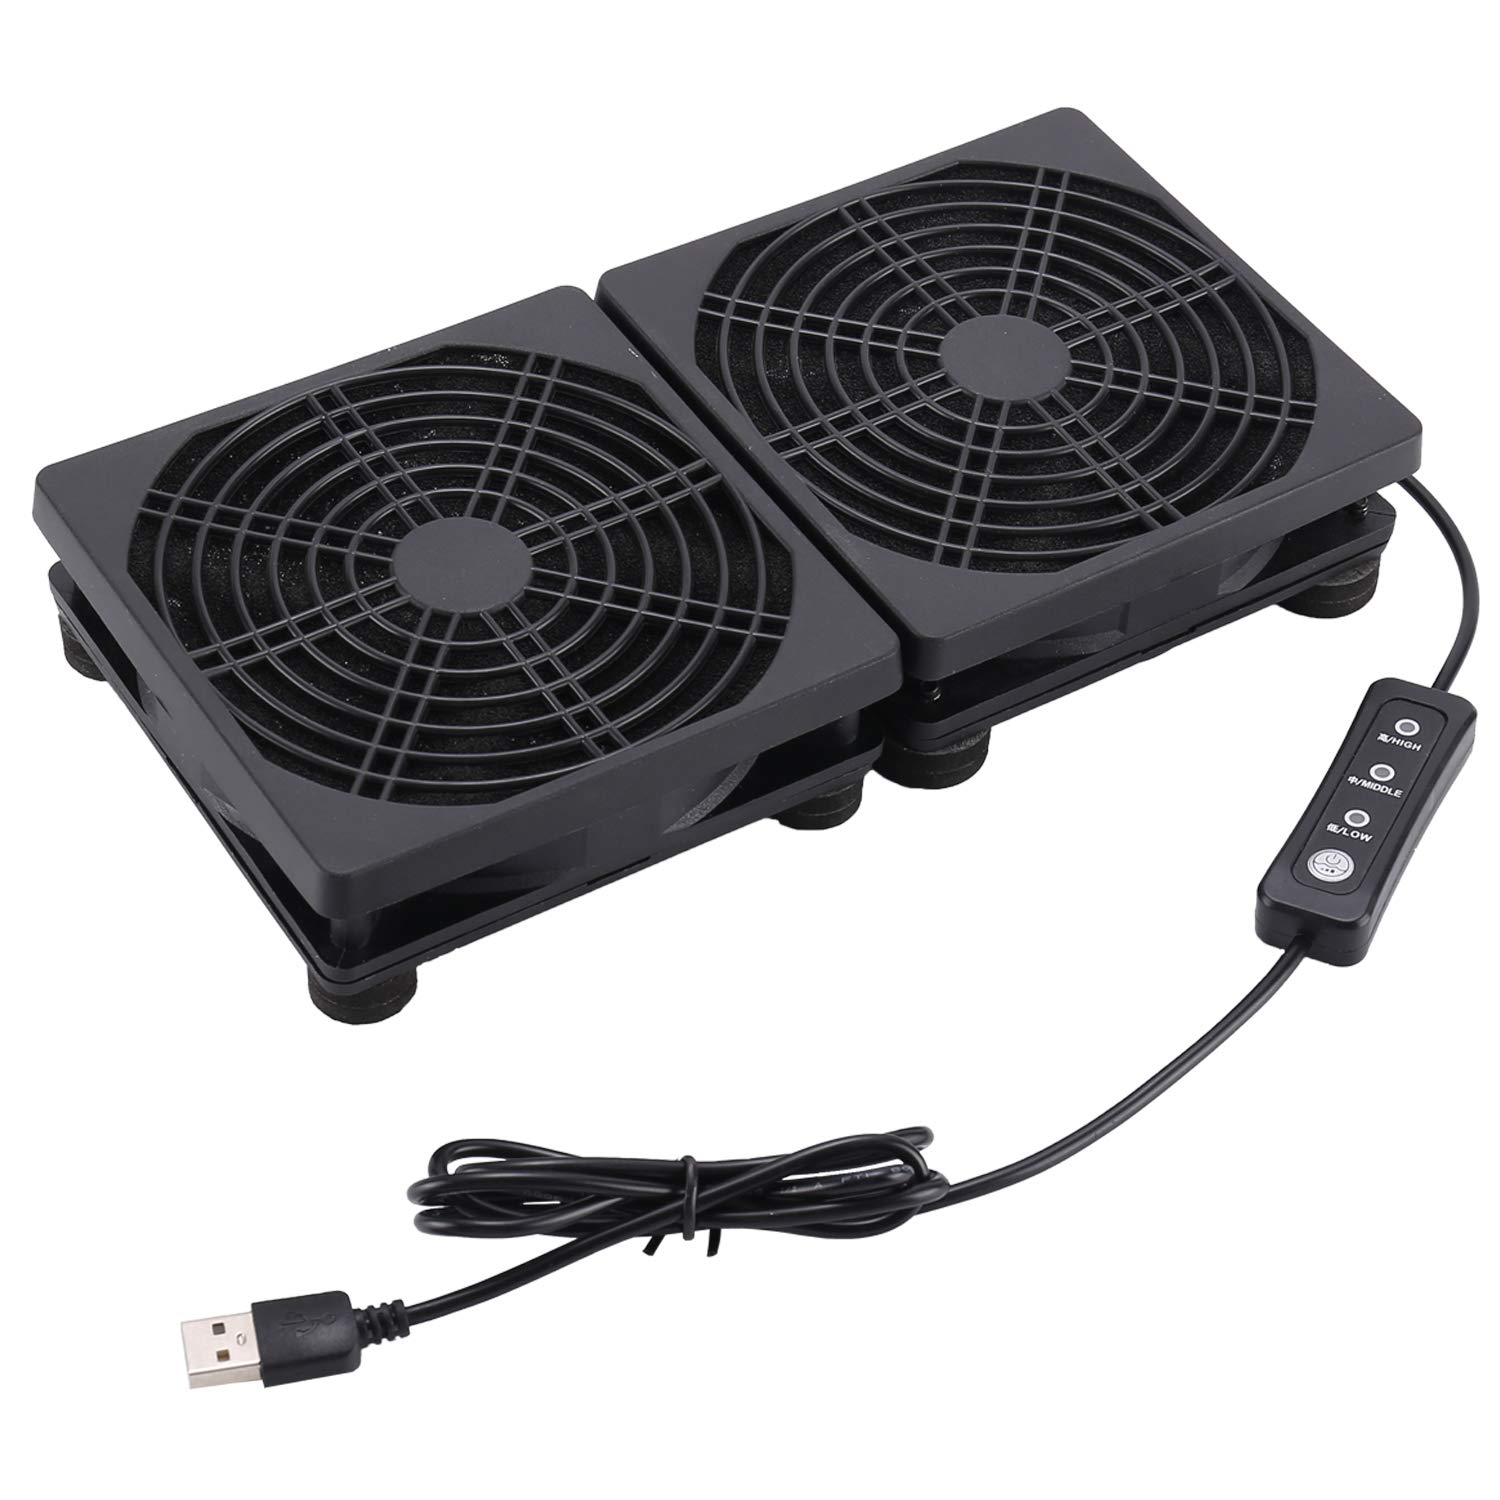 120mmx2 240mm 5V Dual USB Powered PC Router Fans with Speed Controller High Airflow Cooling Fan for Router Modem DVR Playstation TV Box and Other Electronics